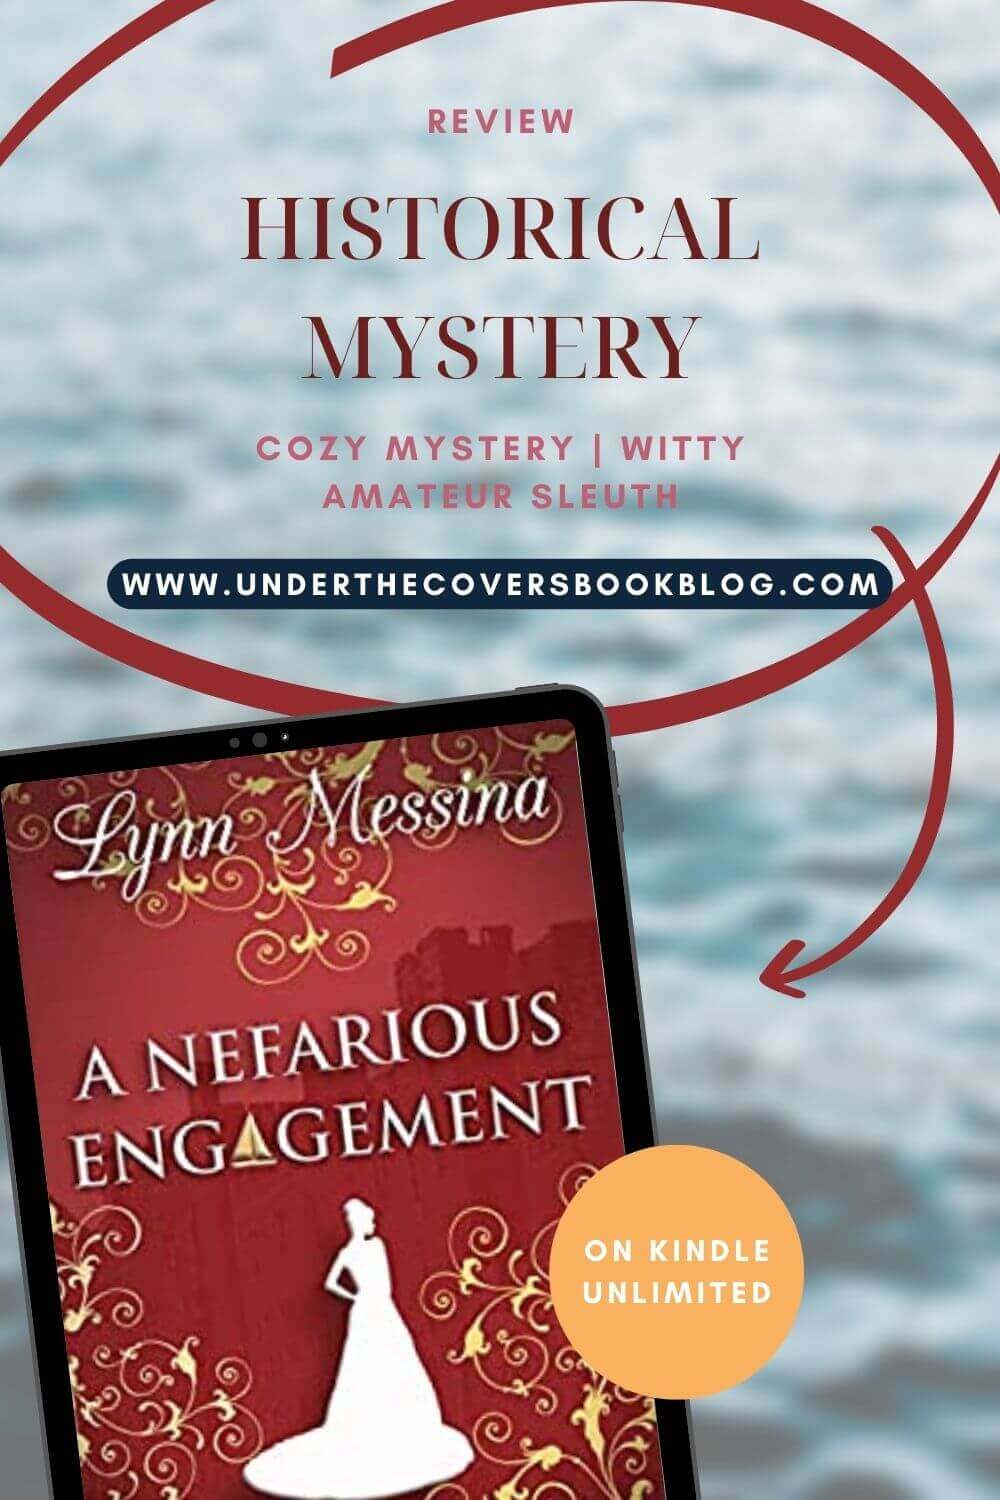 A Nefarious Engagement by Lynn Messina: A Historical Mystery Review